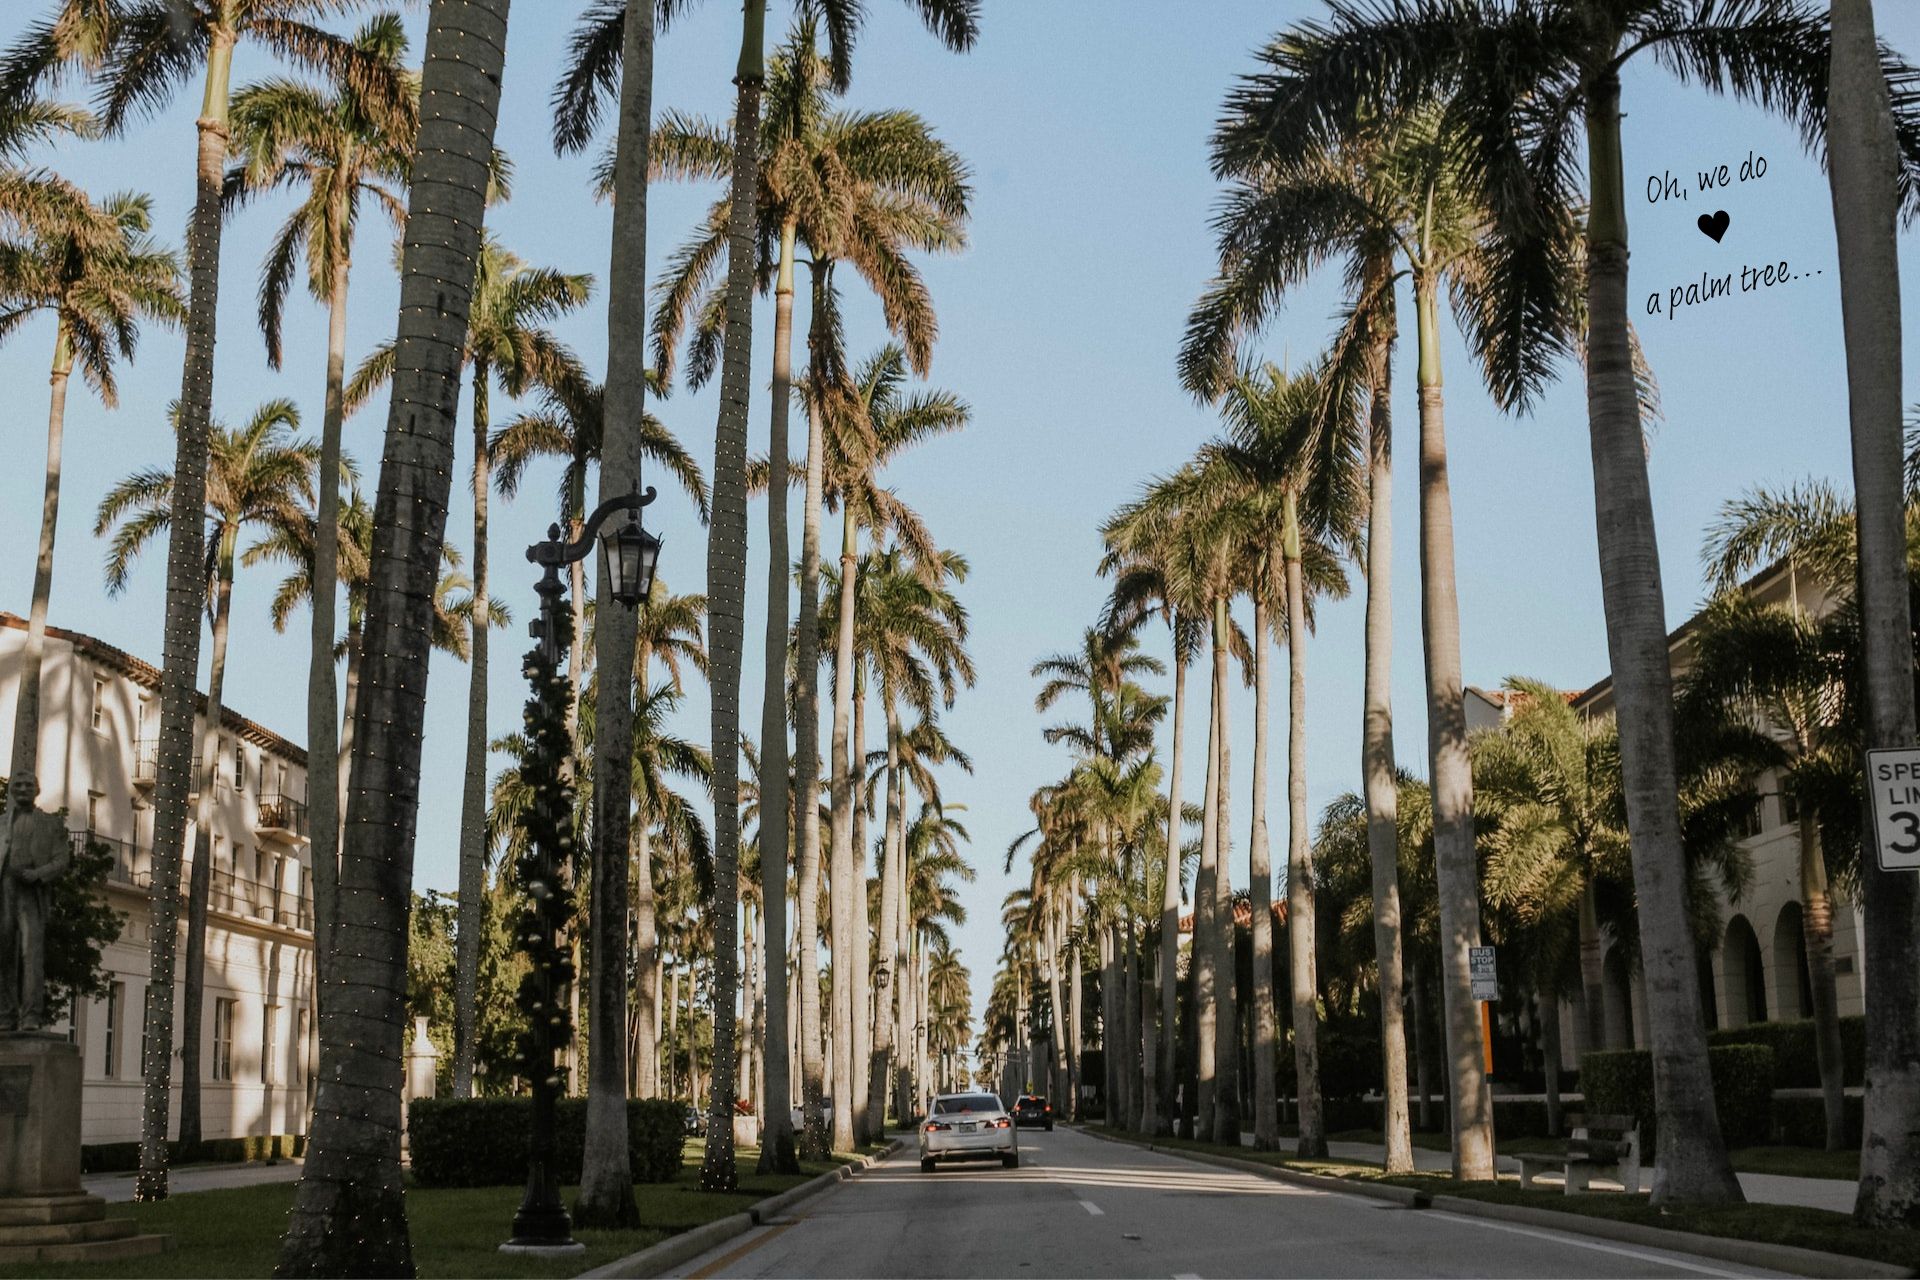 A street, lined by palm trees, in Palm Beach, Florida.